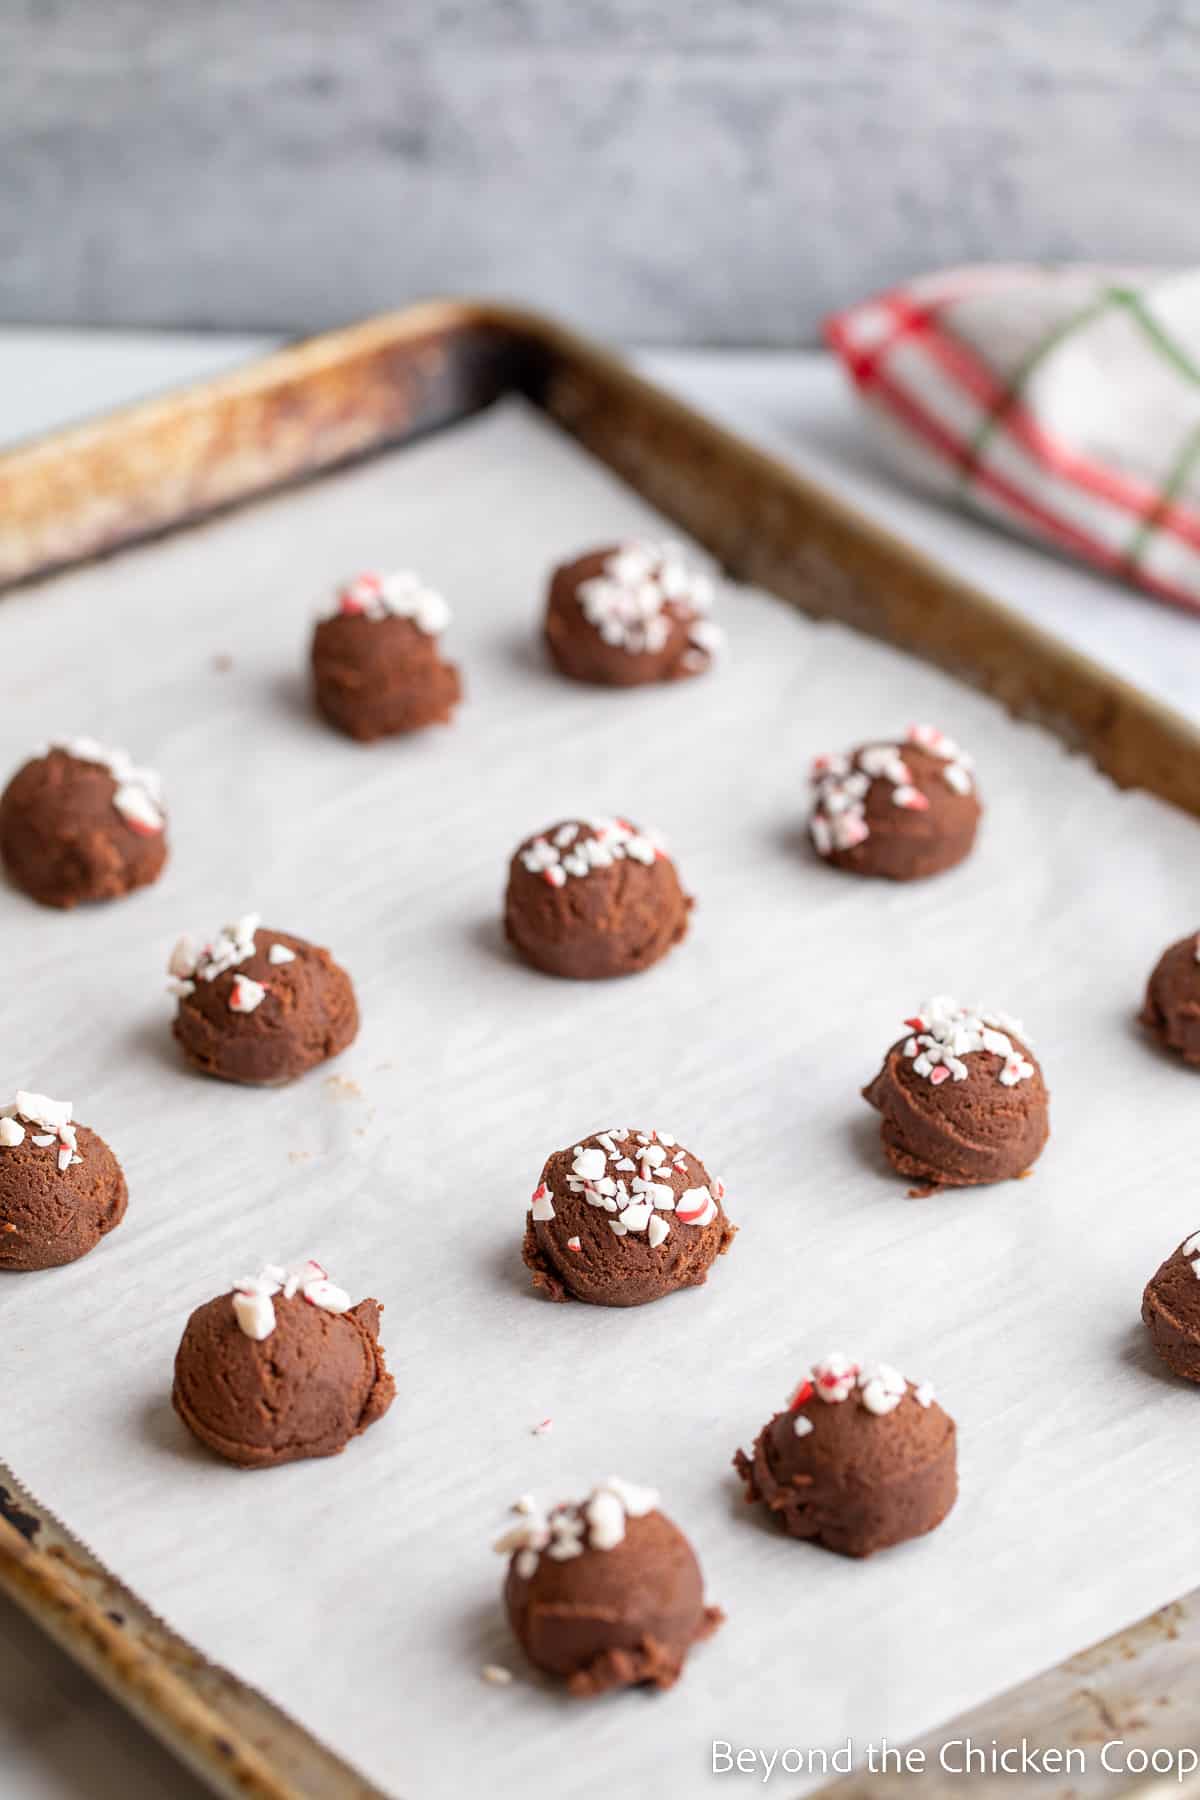 Unbaked chocolate cookies topped with peppermint candies. 